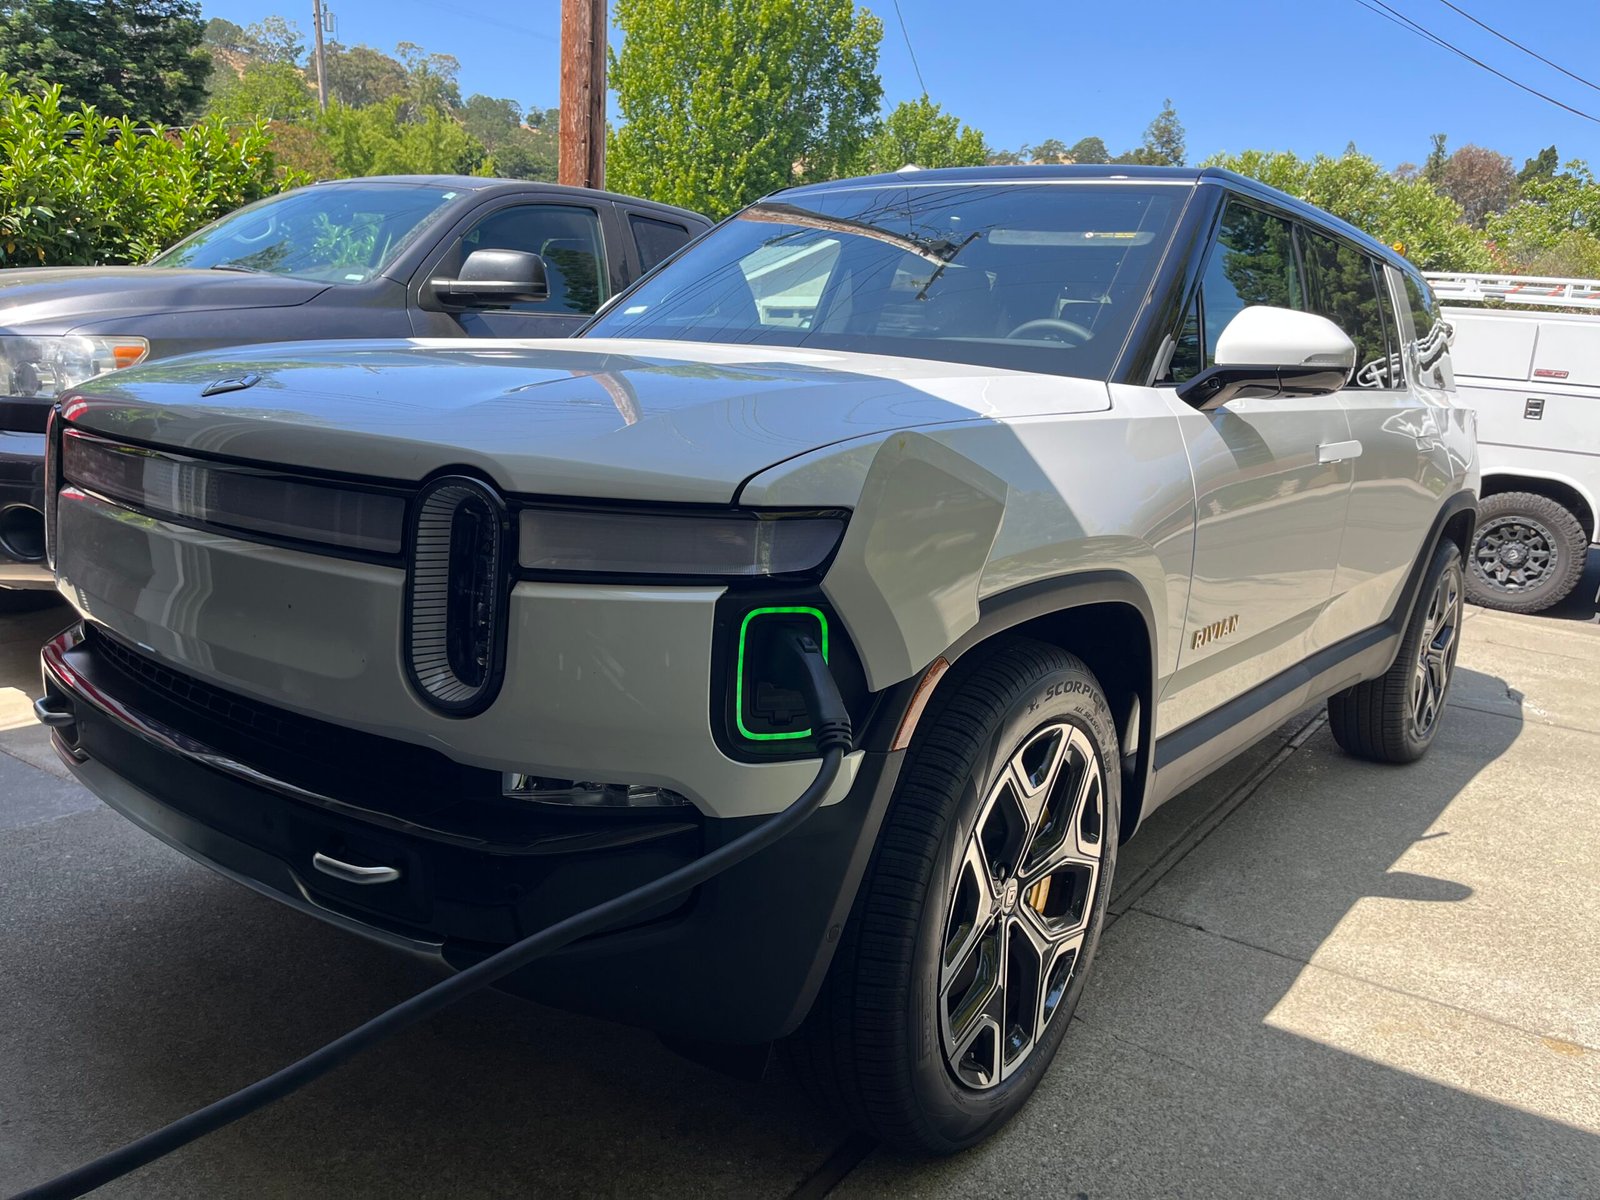 Rivian electric truck charging at a home charging station